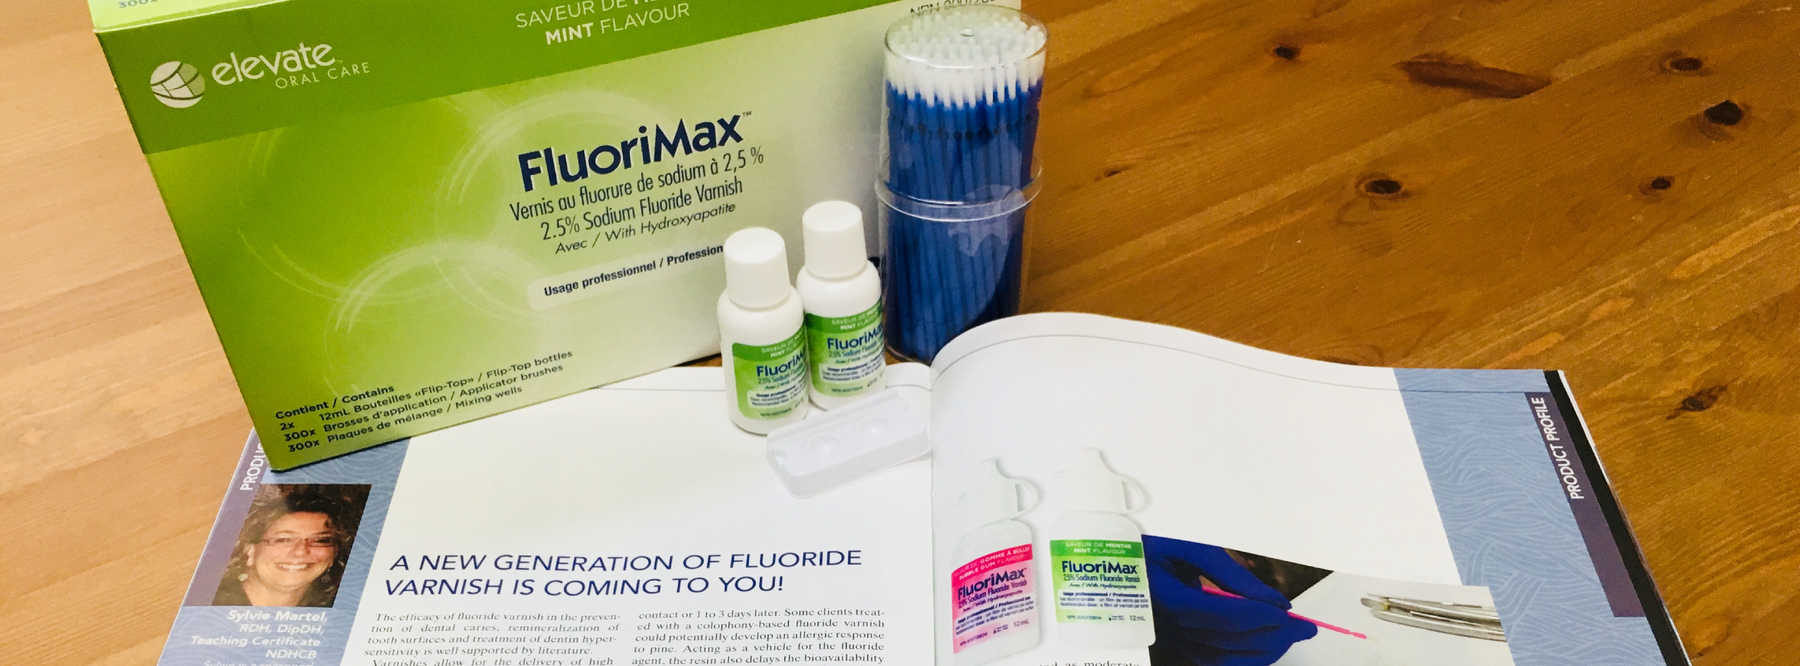 FluoriMax: New Varnish Proven to Be Effective